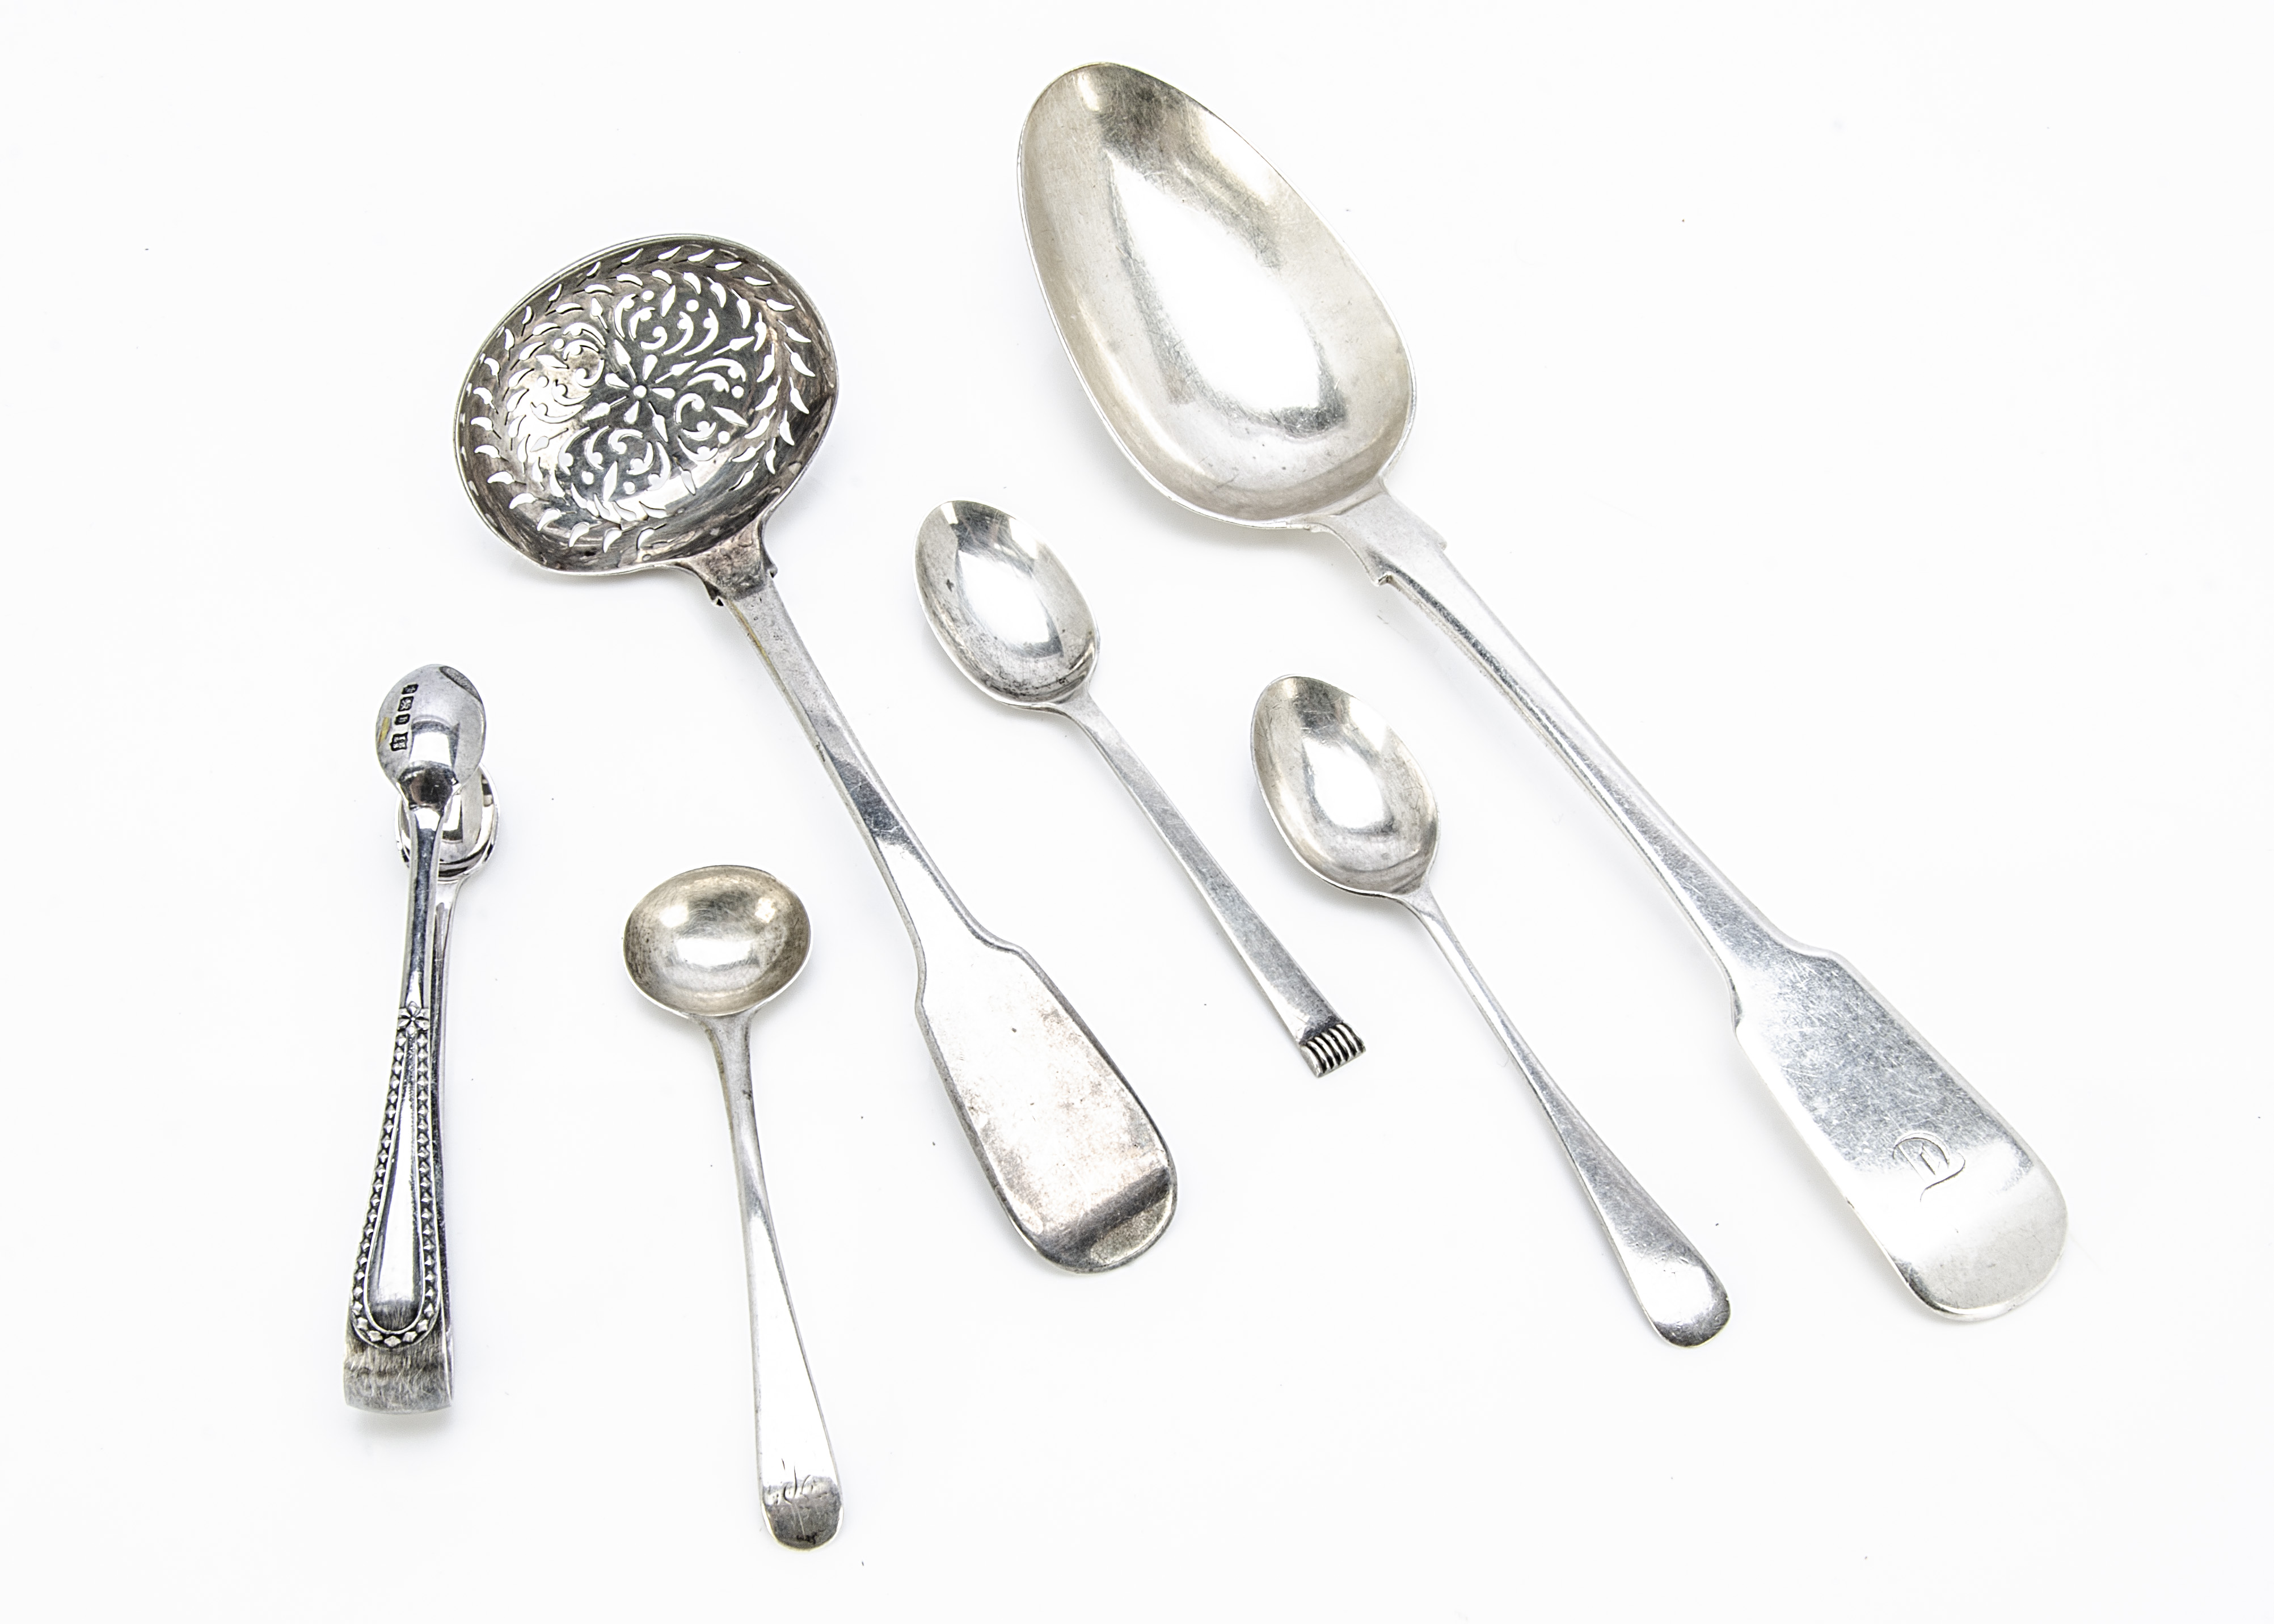 A late Georgian silver tablespoon, together with a silver sifter spoon, tongs and three small